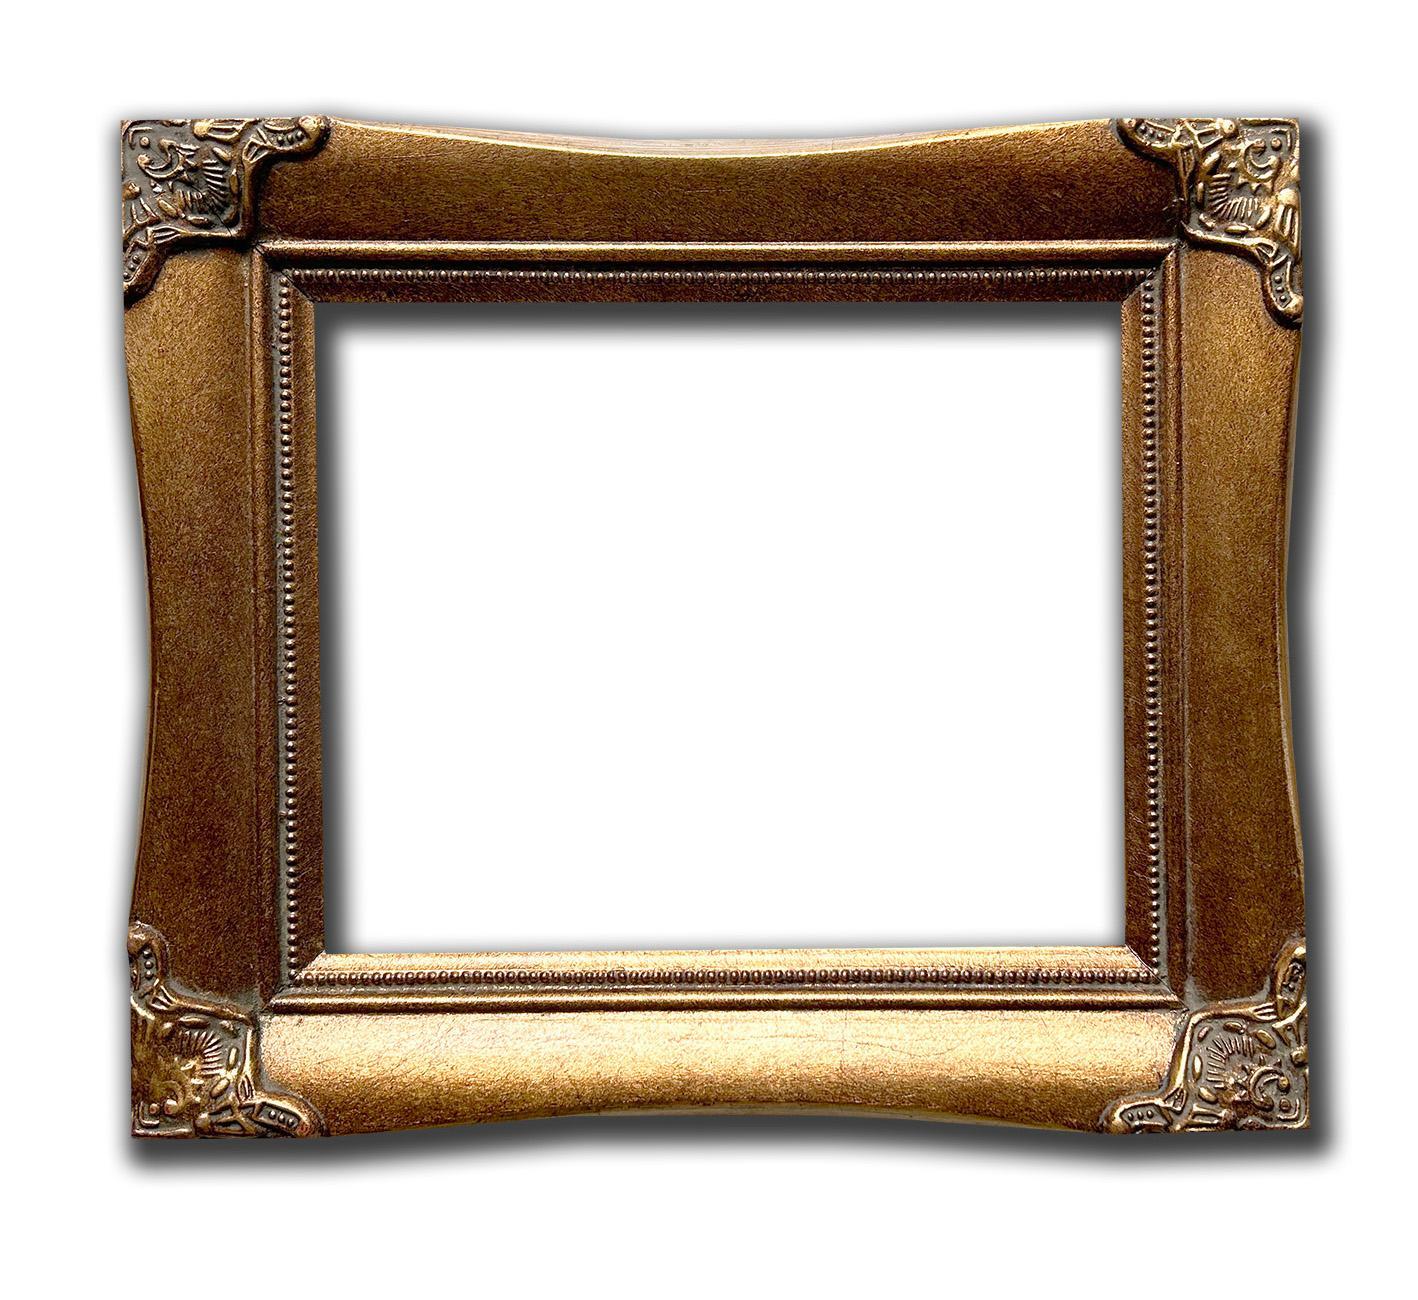 20x25 cm or 8x10 ins, wooden photo frame